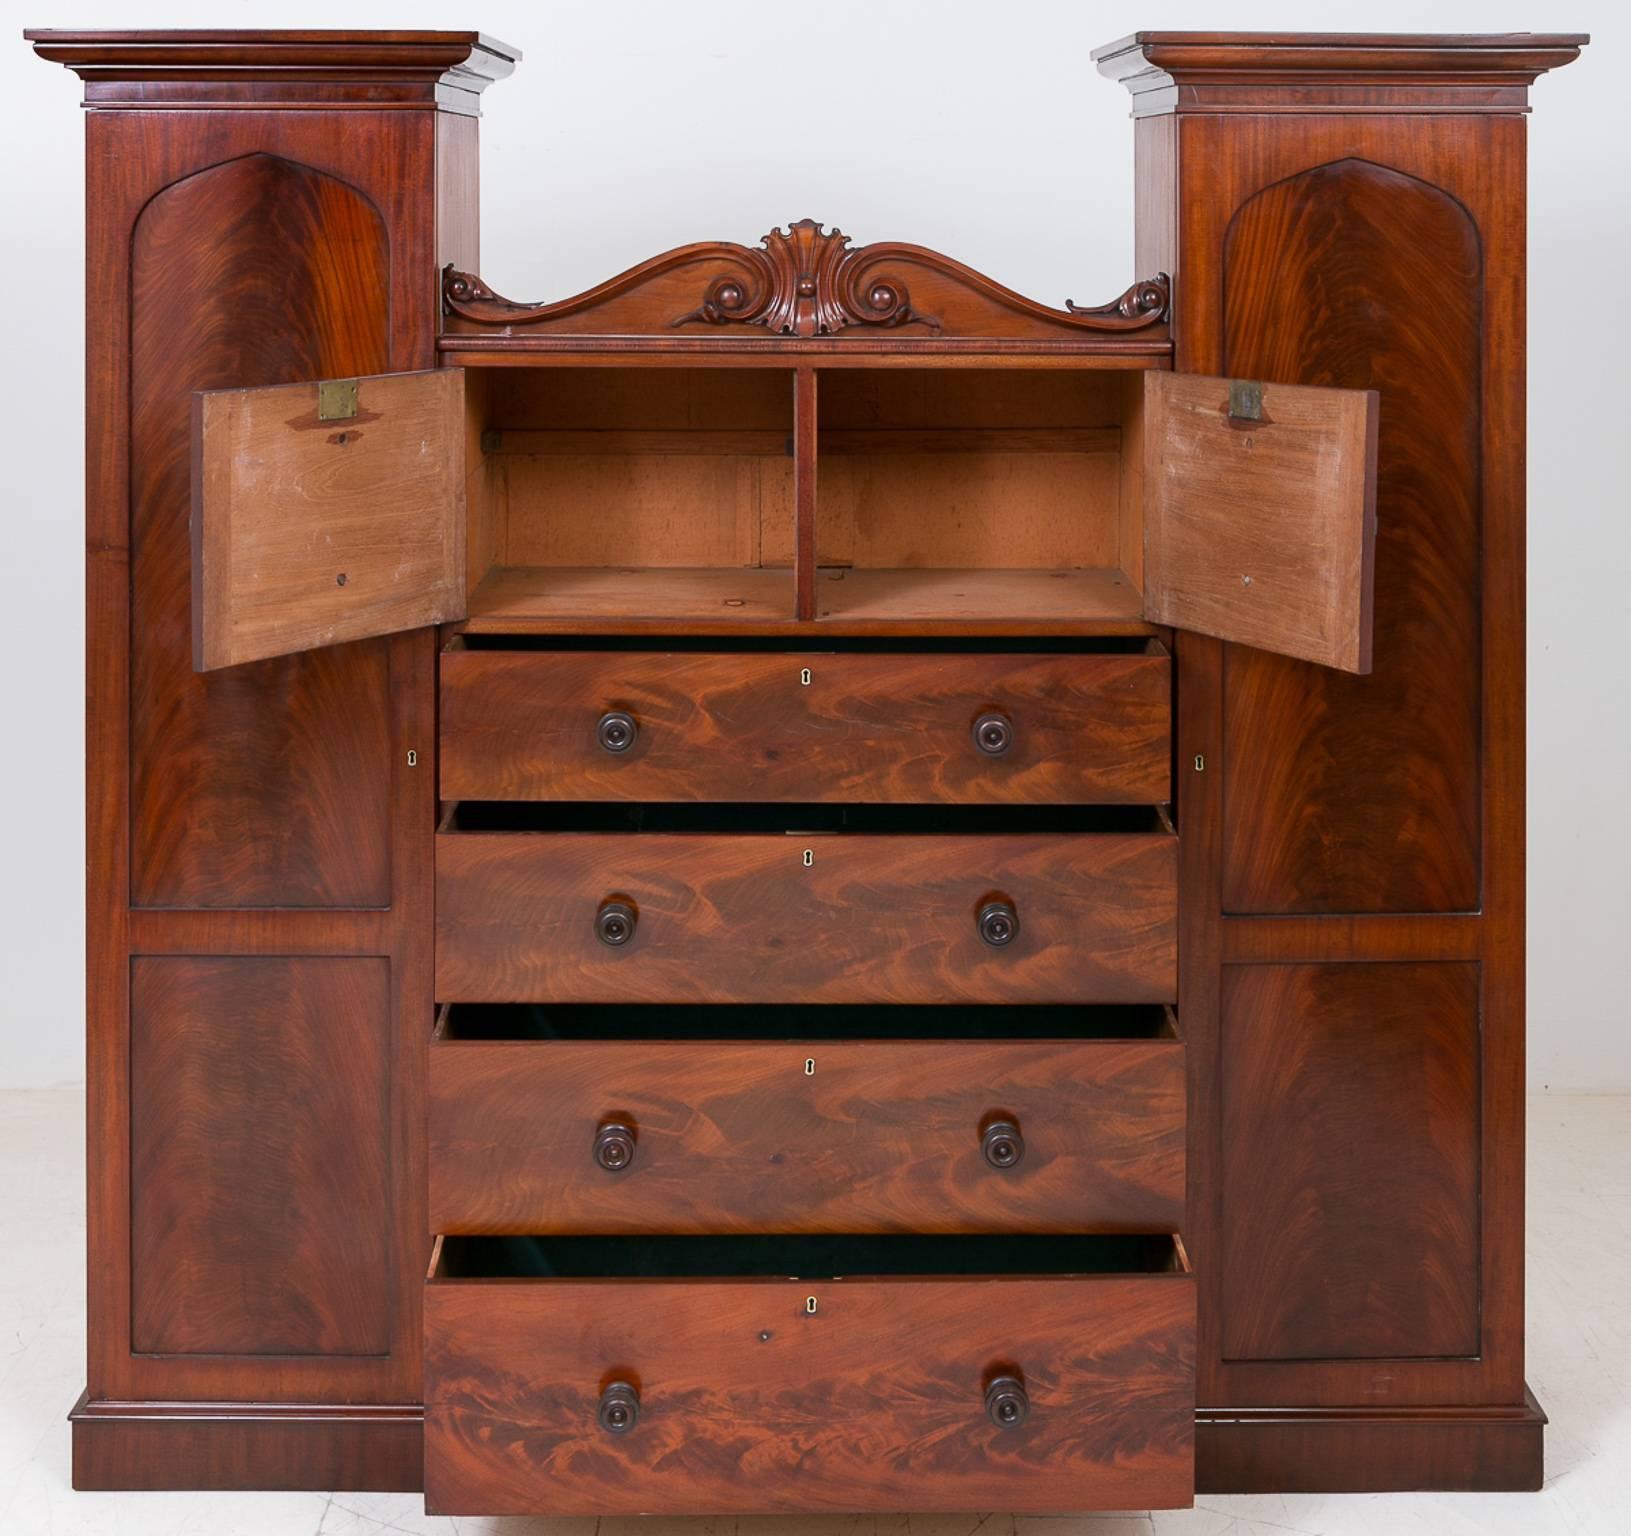 Here we have an early Victorian superb quality mahogany turret wardrobe.
The centre section having four graduated mahogany lined drawers with original turned knobs and brass locks.
The left hand turret is having shirt slides and hanging space the